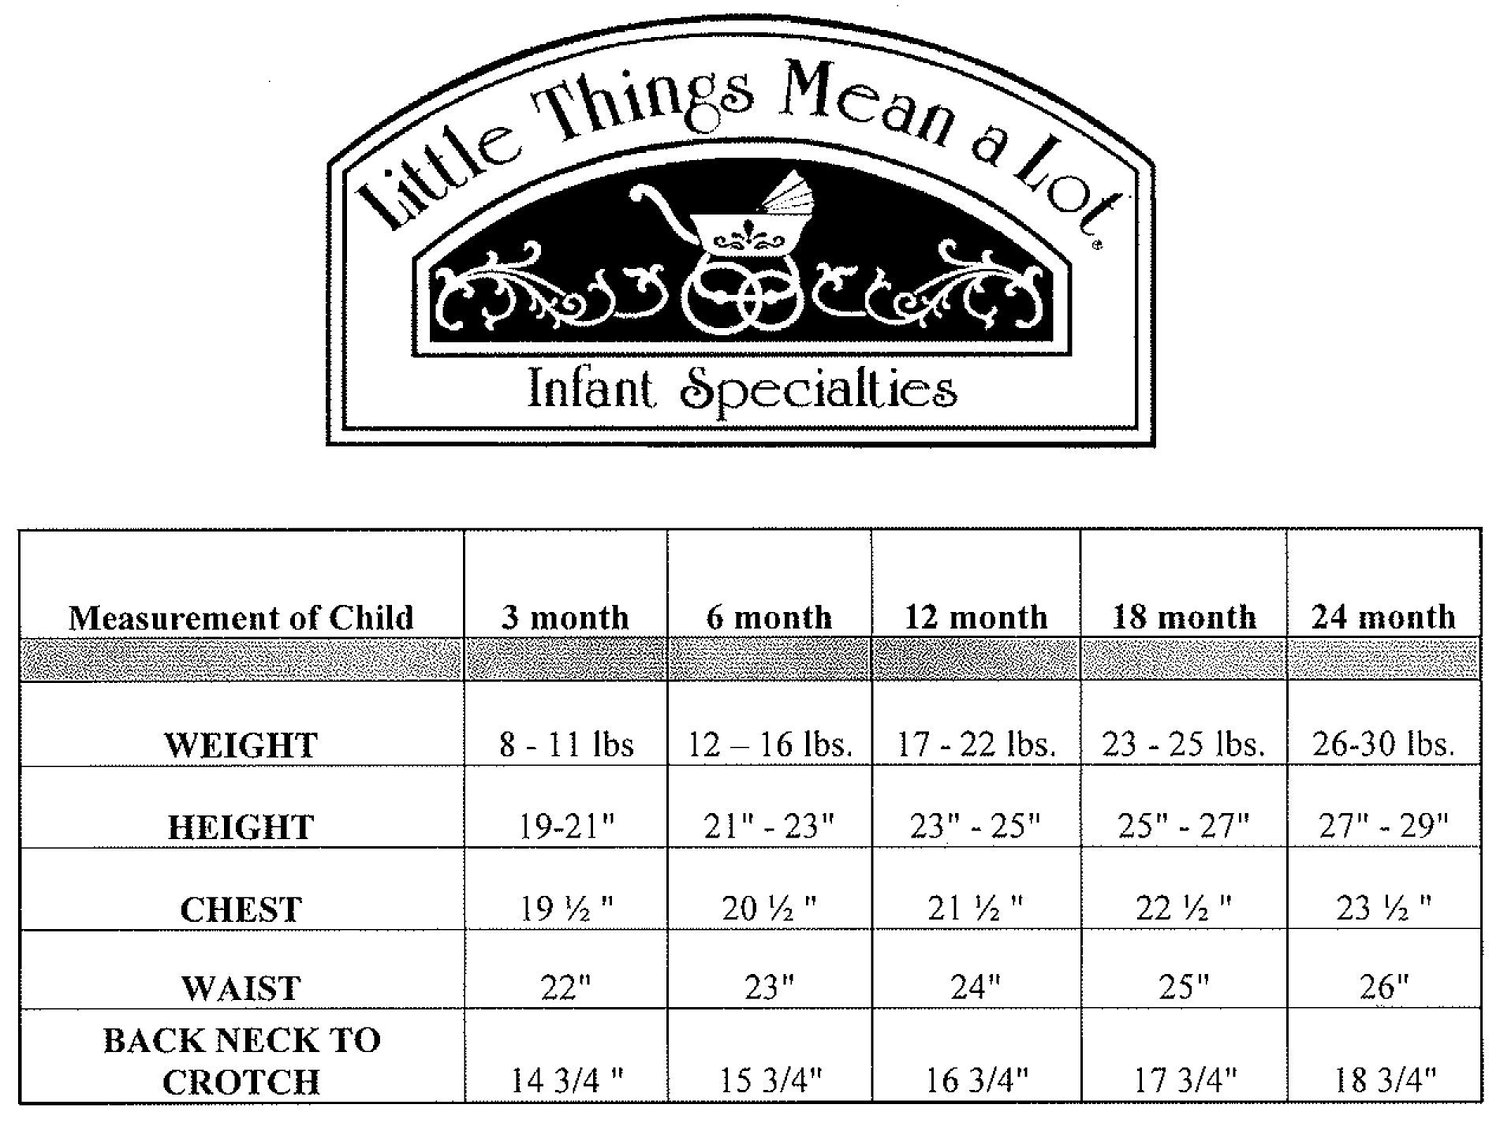 MA-BJ24GS Size Chart Image - Little Things Mean a Lot